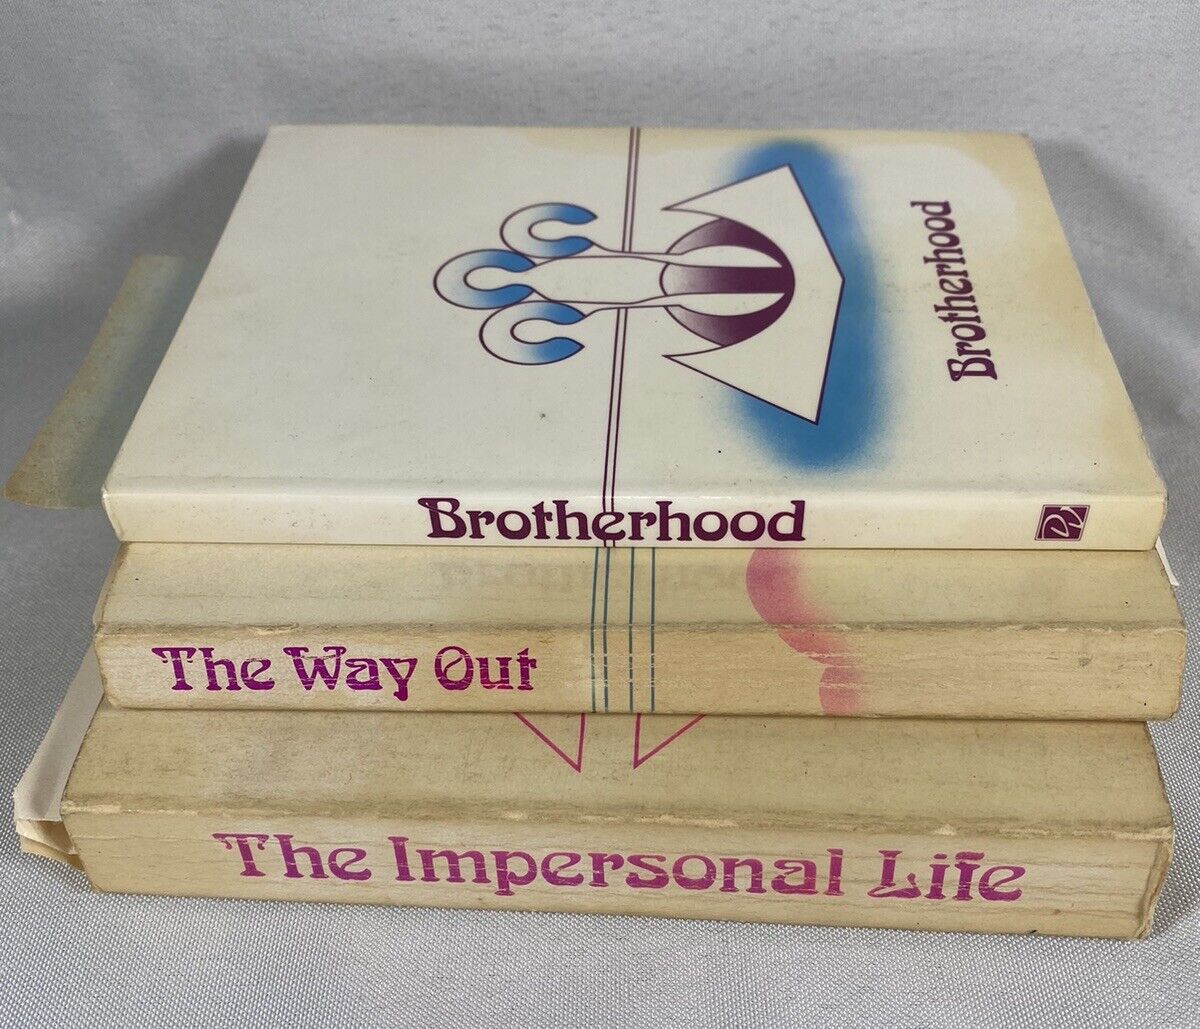 Vintage 1980-90’s Religious Books The Impersonal Life, Brotherhood, The Way Out